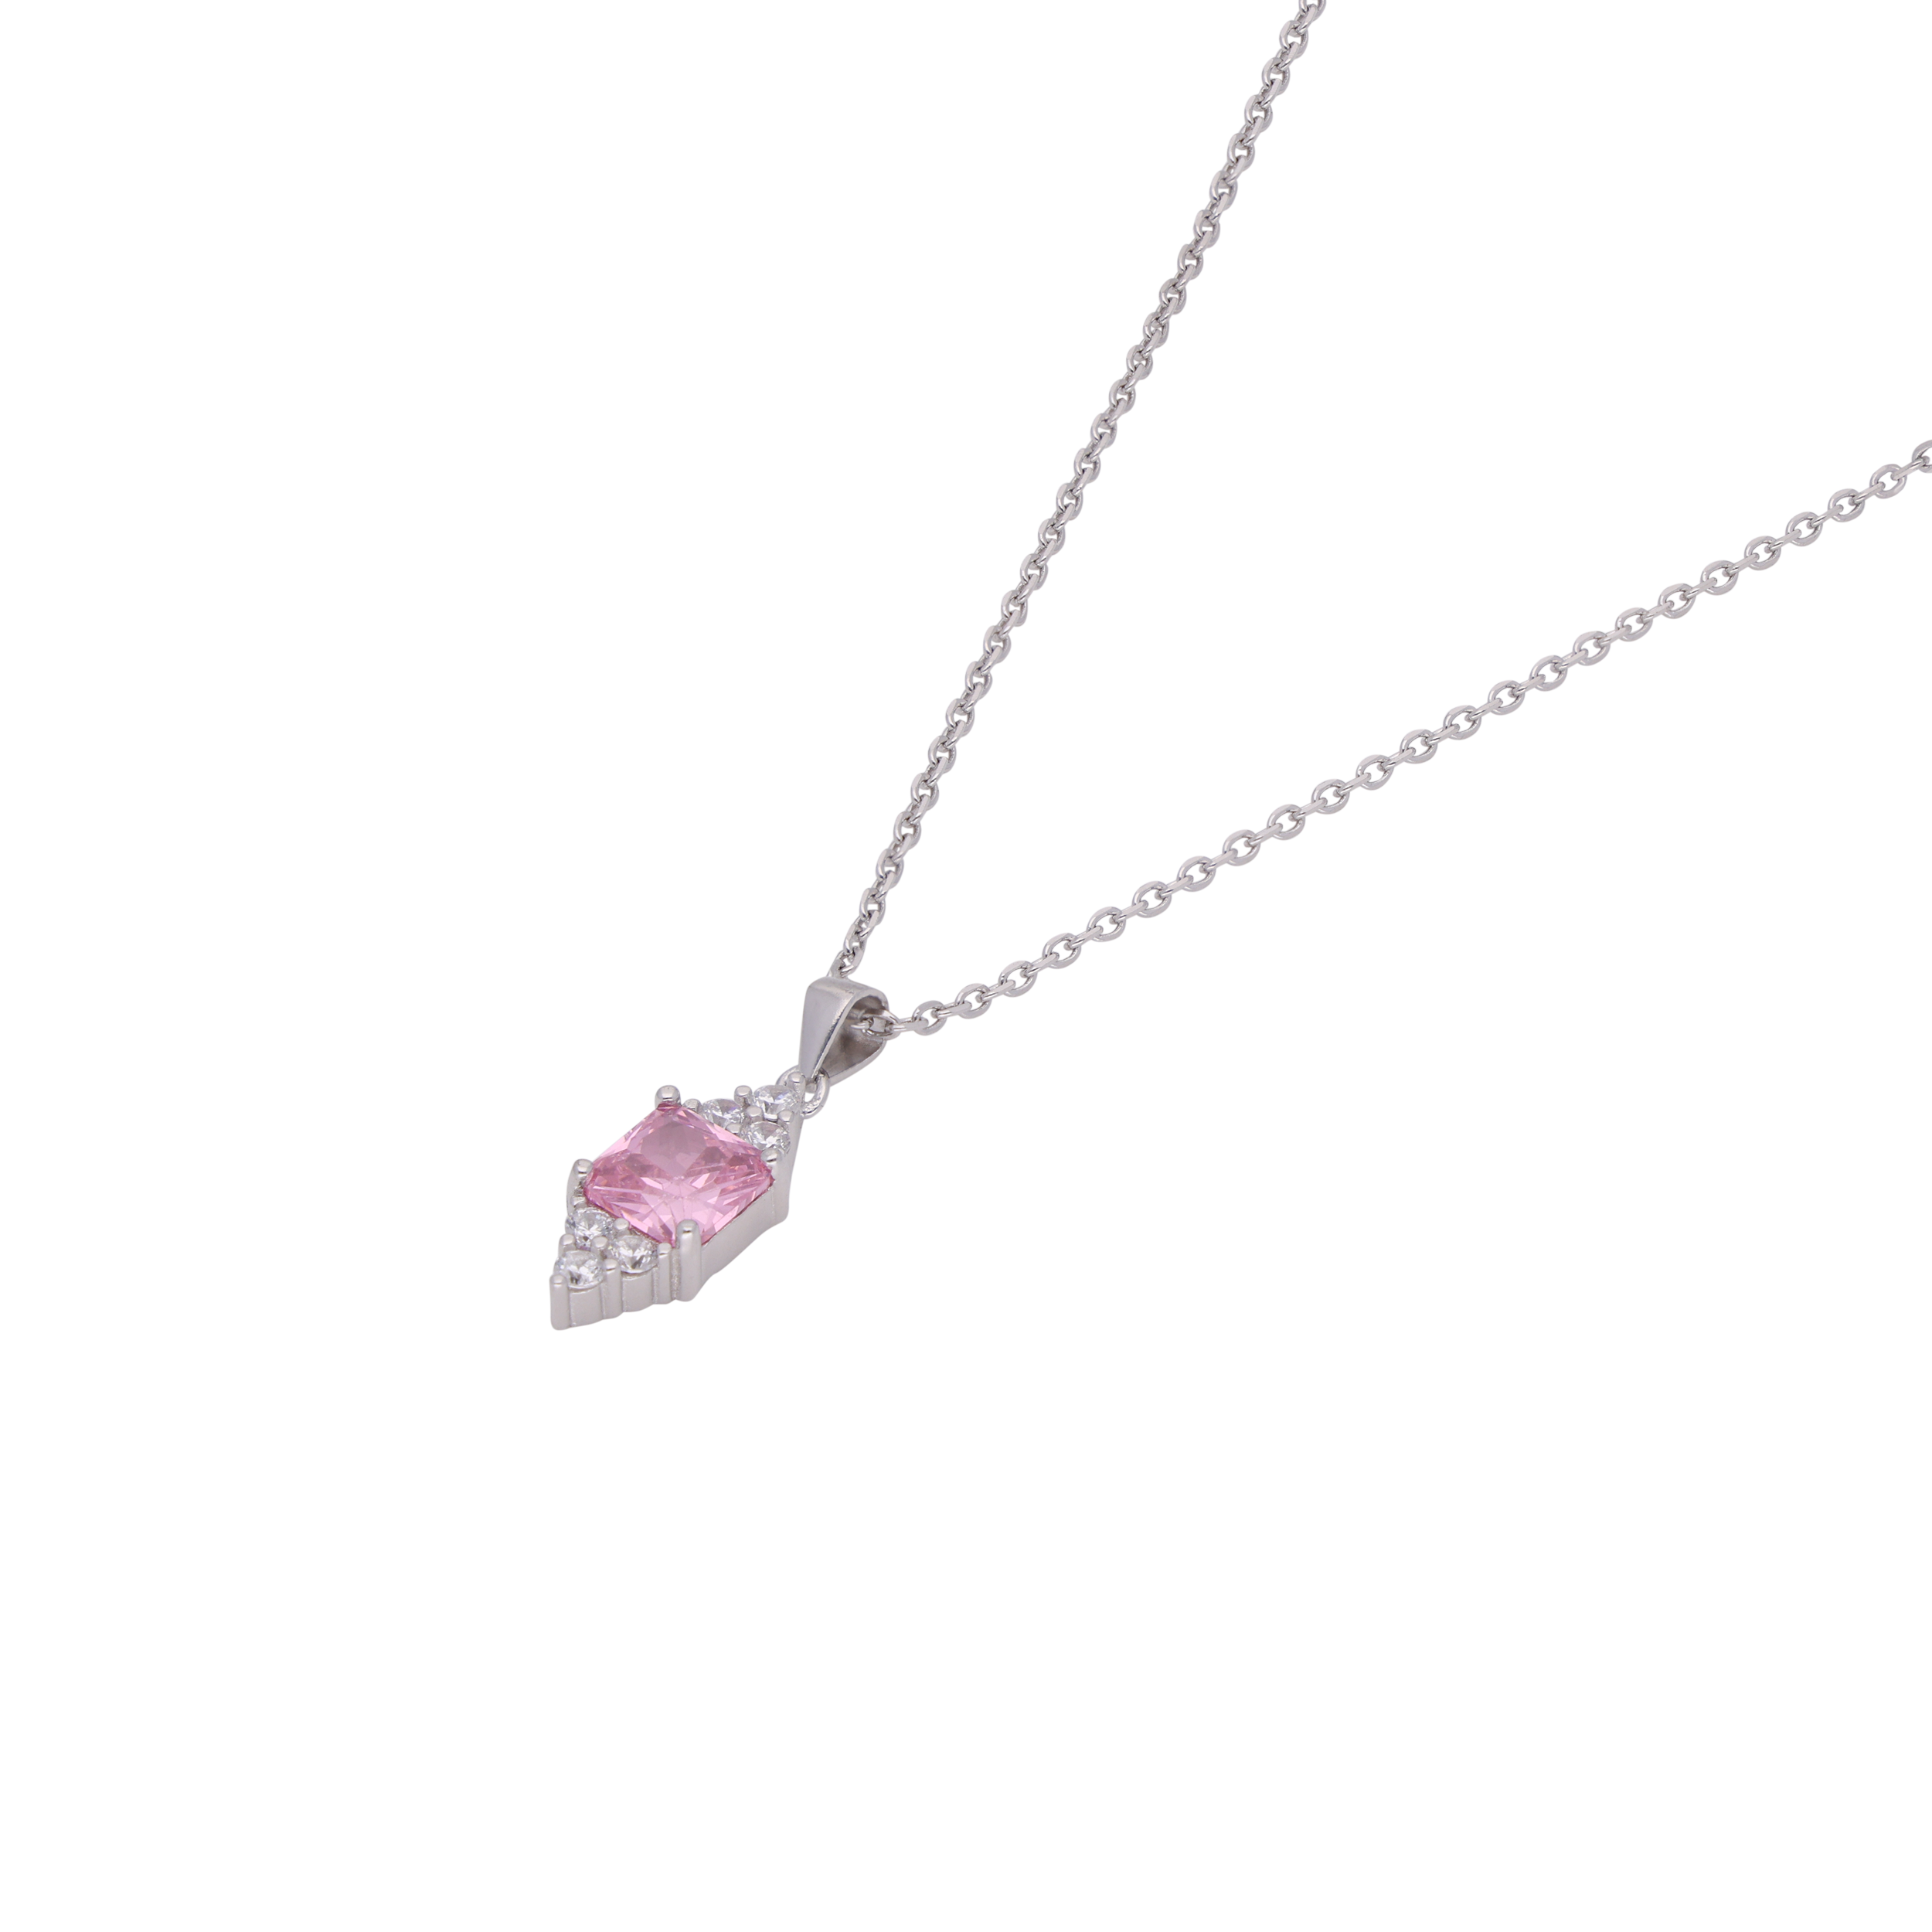 Radiant Bloom: Pendant Chain with Pink Cubic Zirconia  | SKU: 0019281704, 0019281612, 0019281735, 0019272276